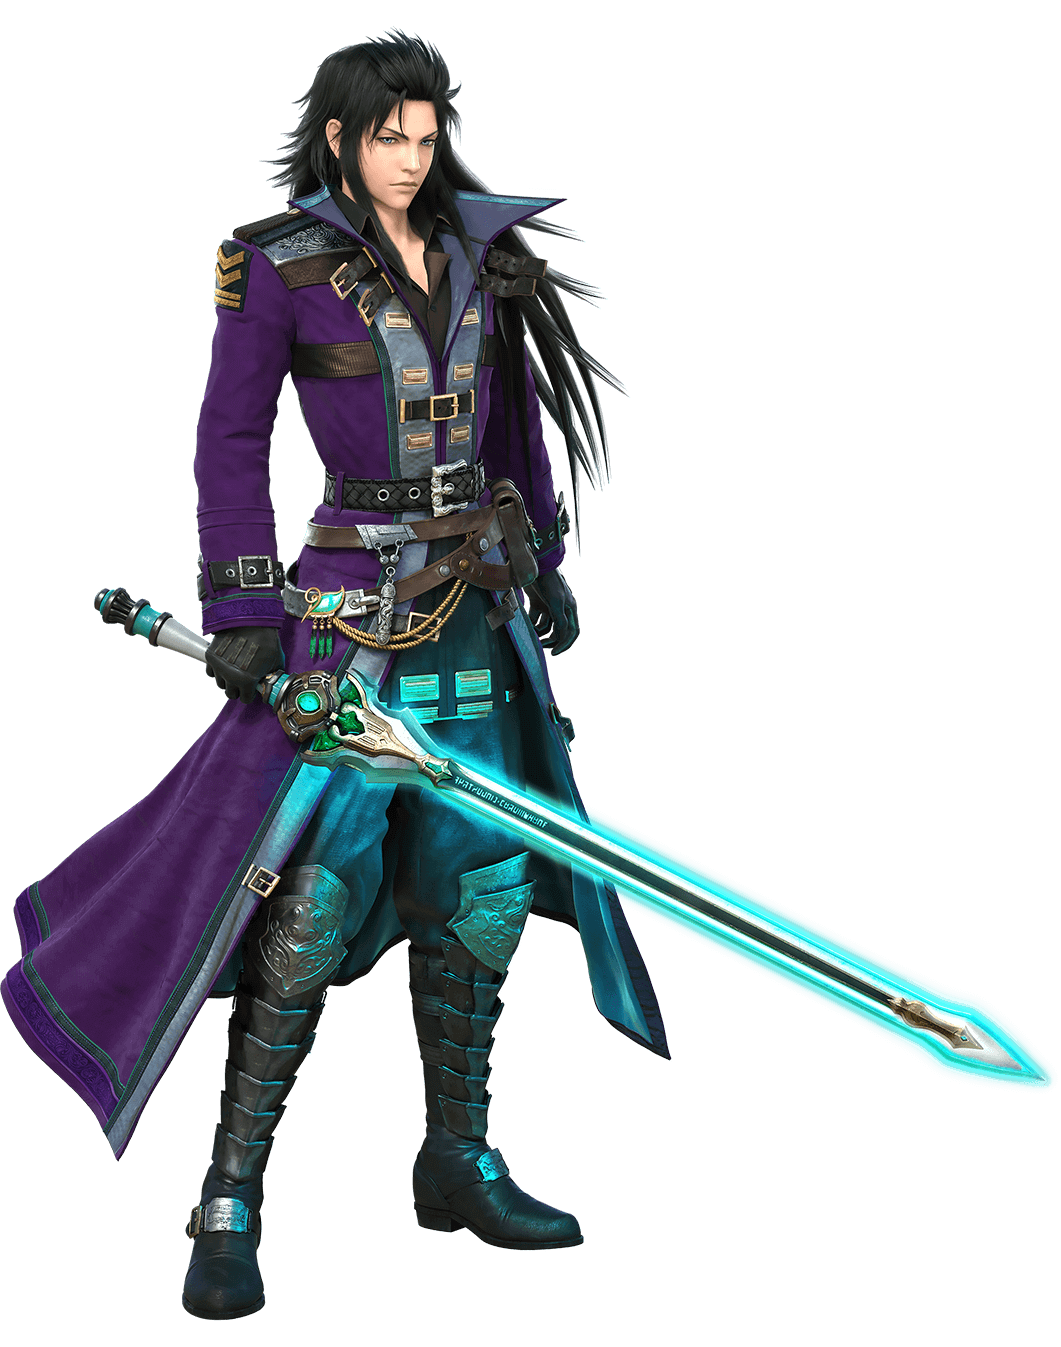 FFBE_-_Lasswell_-_Full_body_render.png